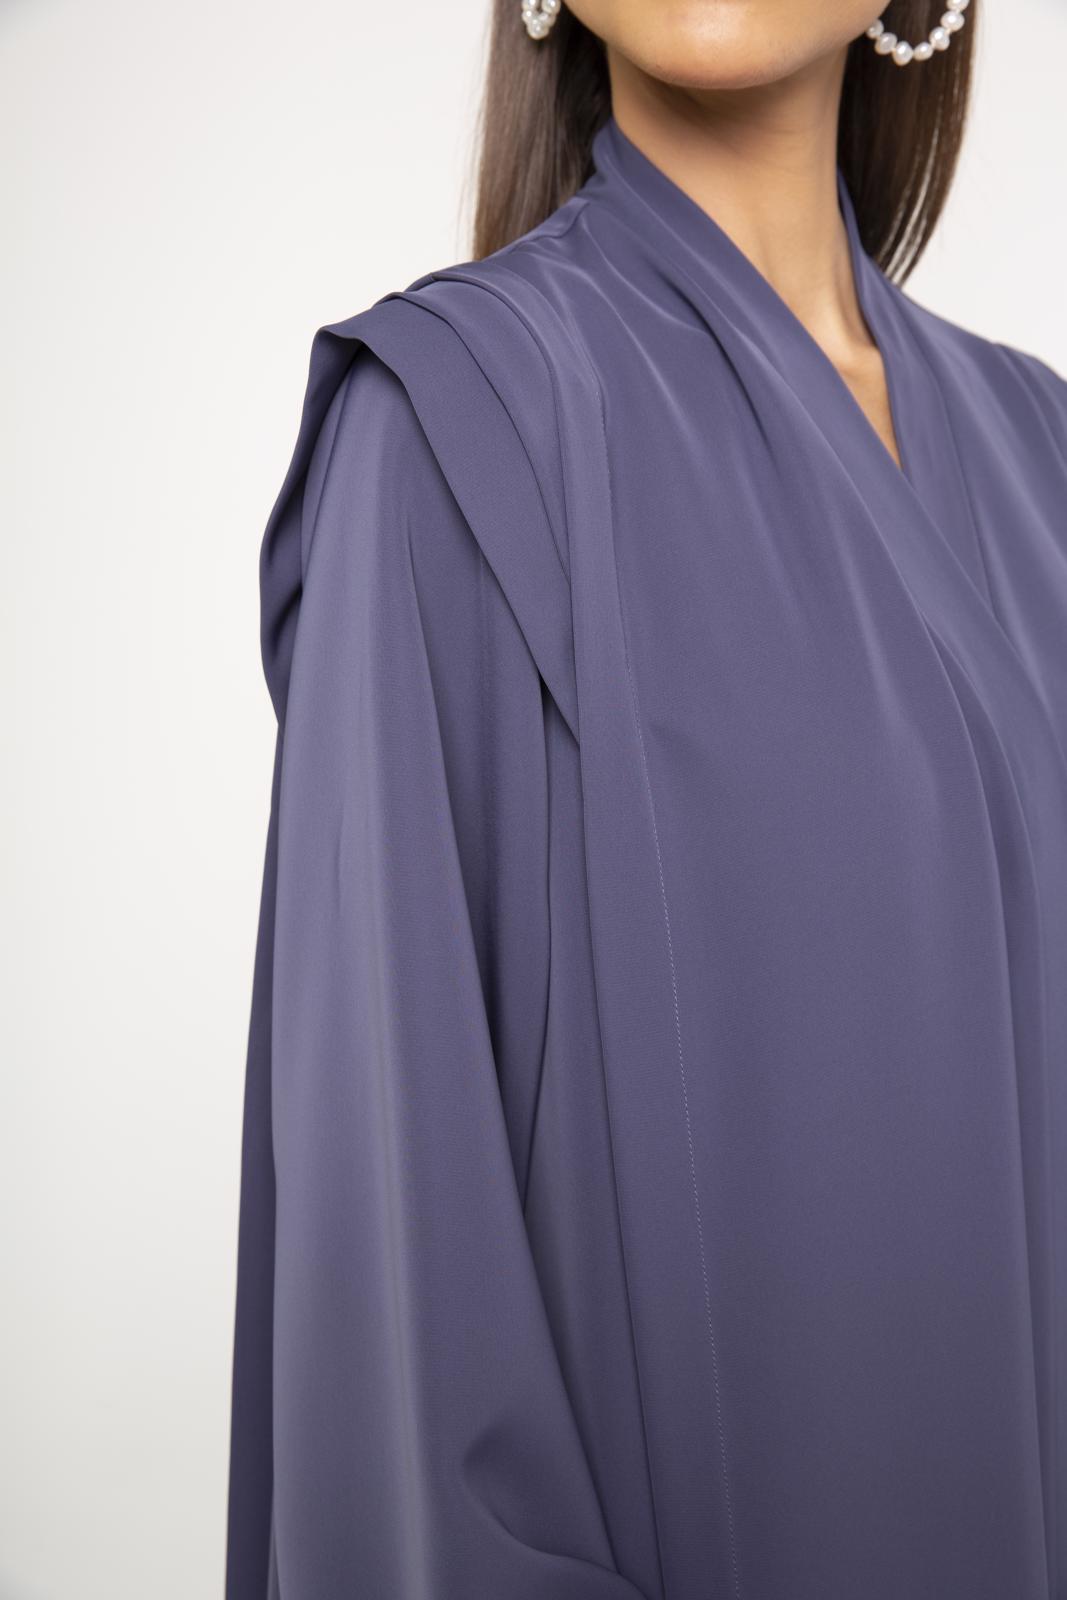 Abaya with structured shoulder lines